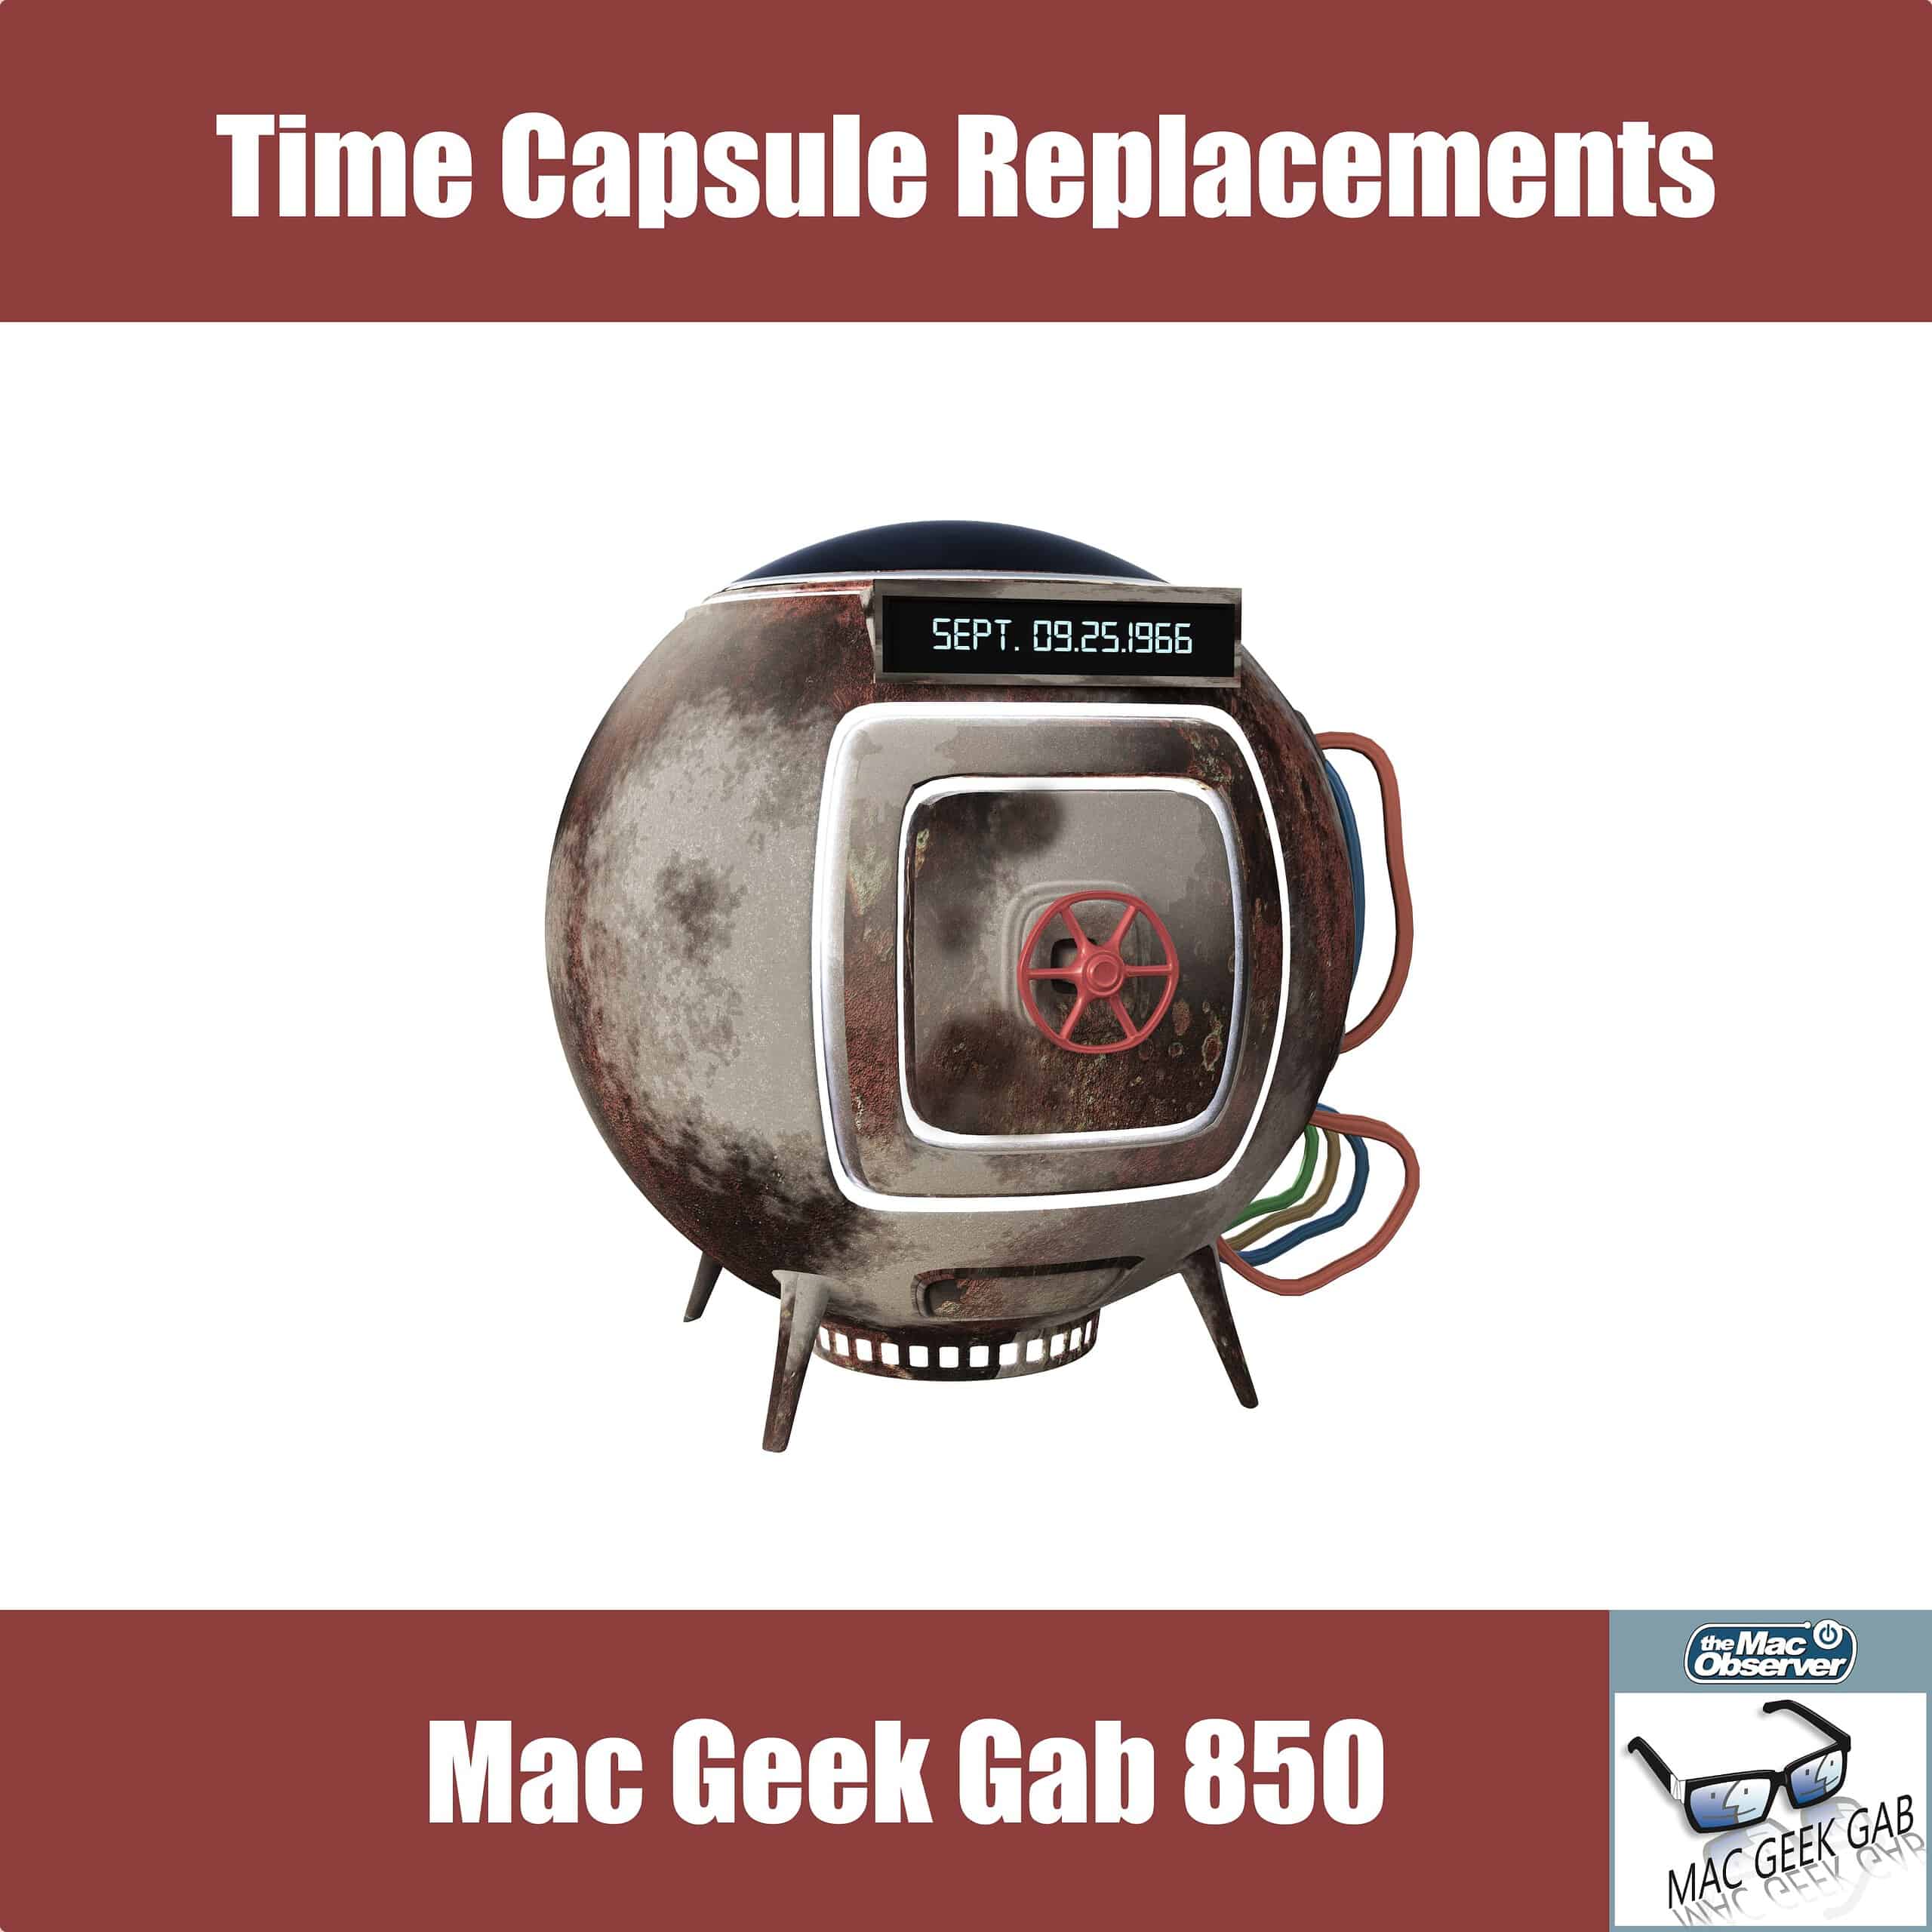 Time Capsule Replacements, Quick Tips, & Cool Stuff Found — Mac Geek Gab 850